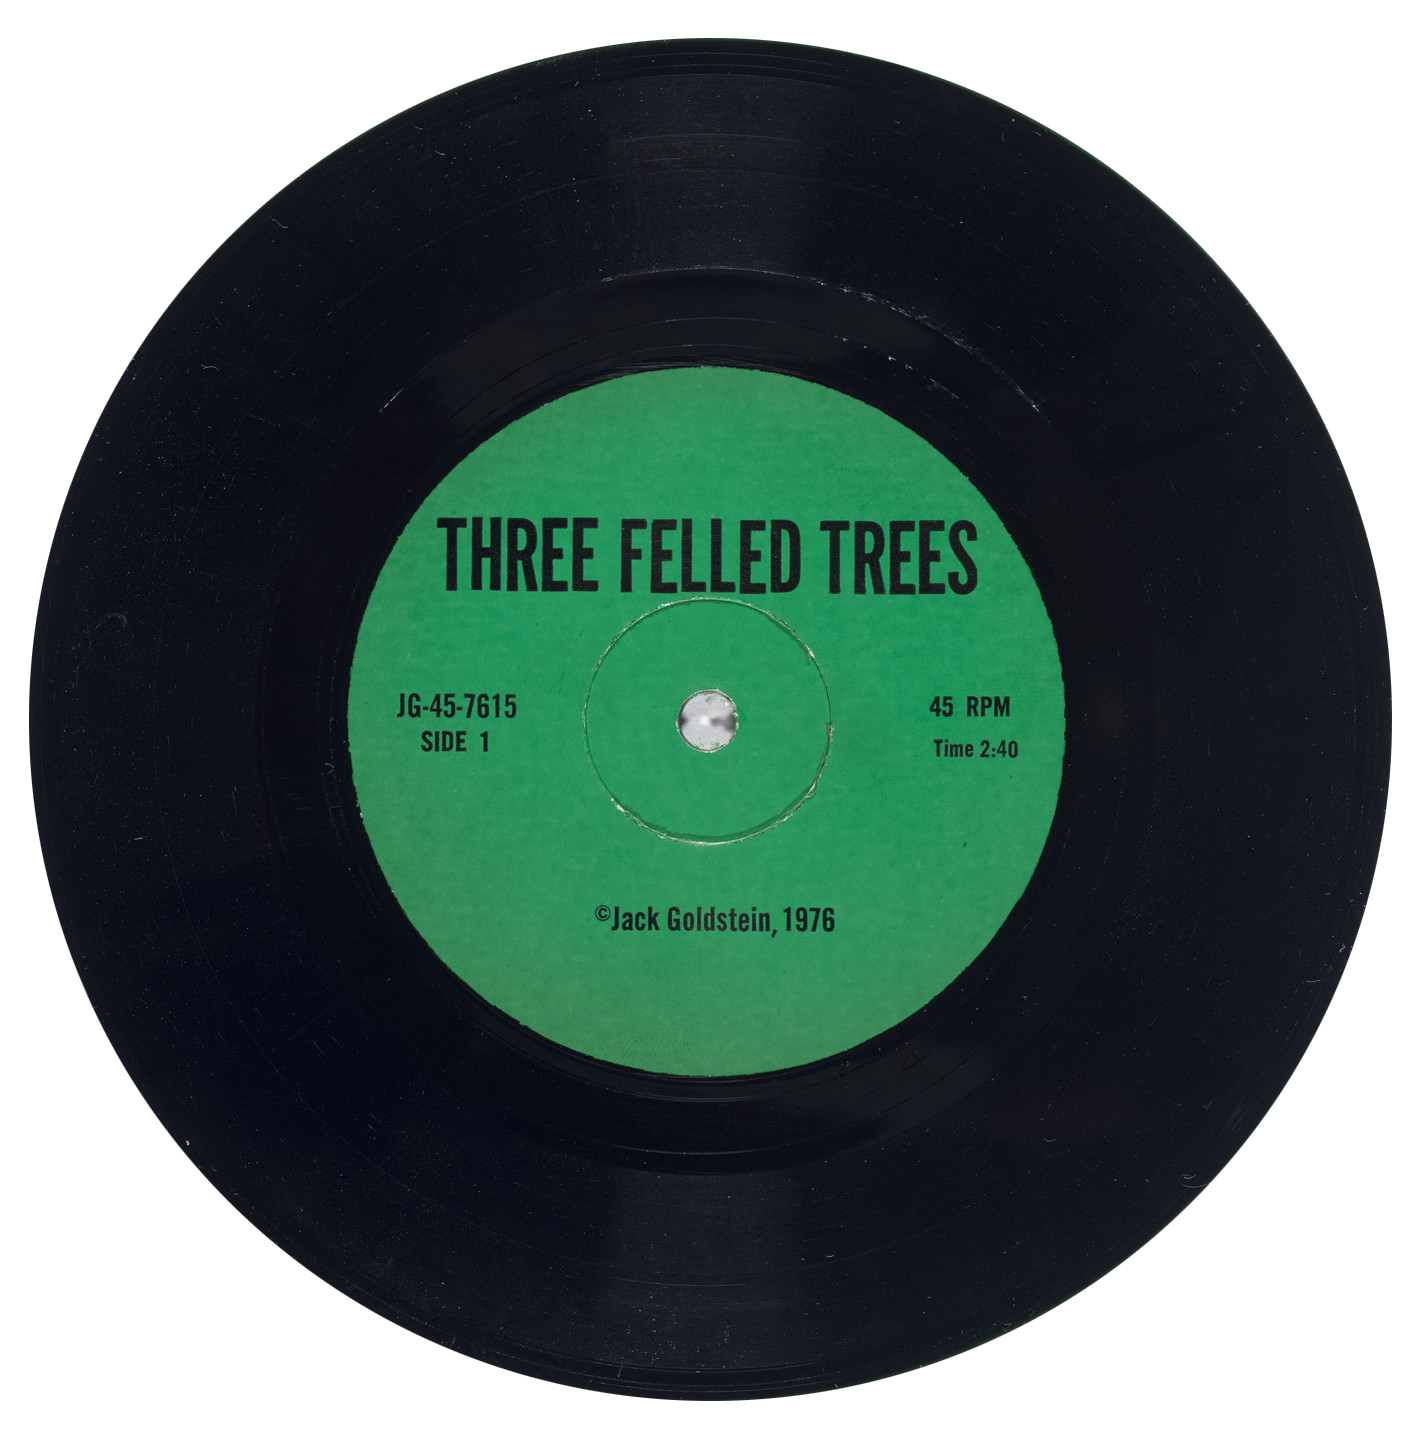  THRee Felled Trees
Green vinyl - 45 rpm 7-inch record

Three Felled Trees is one of the nine components of :
A Suite of Nine 45 rpm 7-Inch Records with Sound Effects
1976